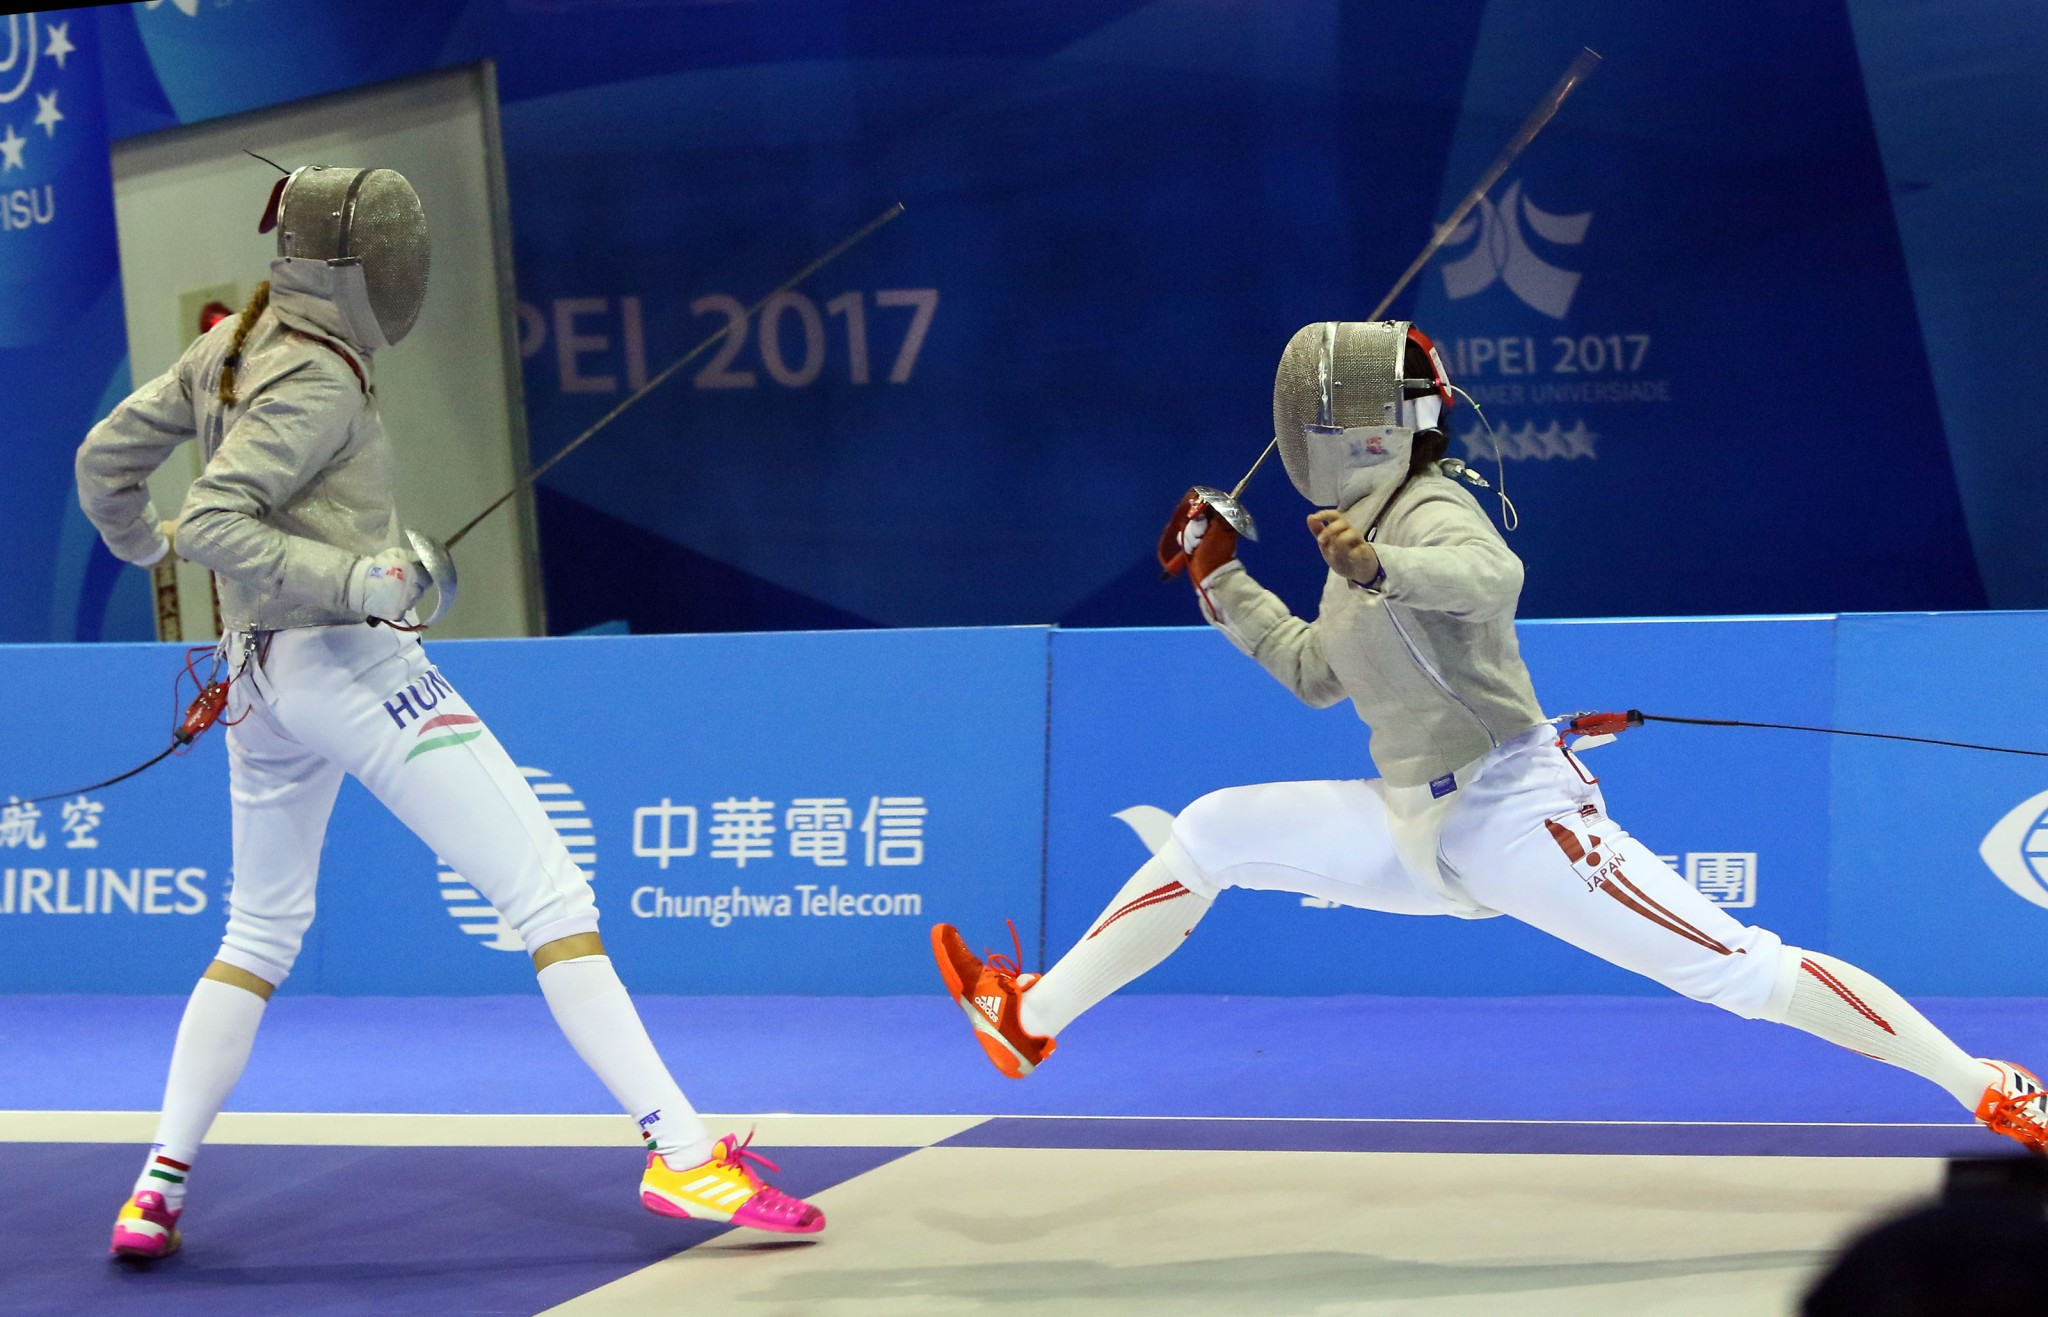 Japan earn double gold as fencing draws to a close at Taipei 2017